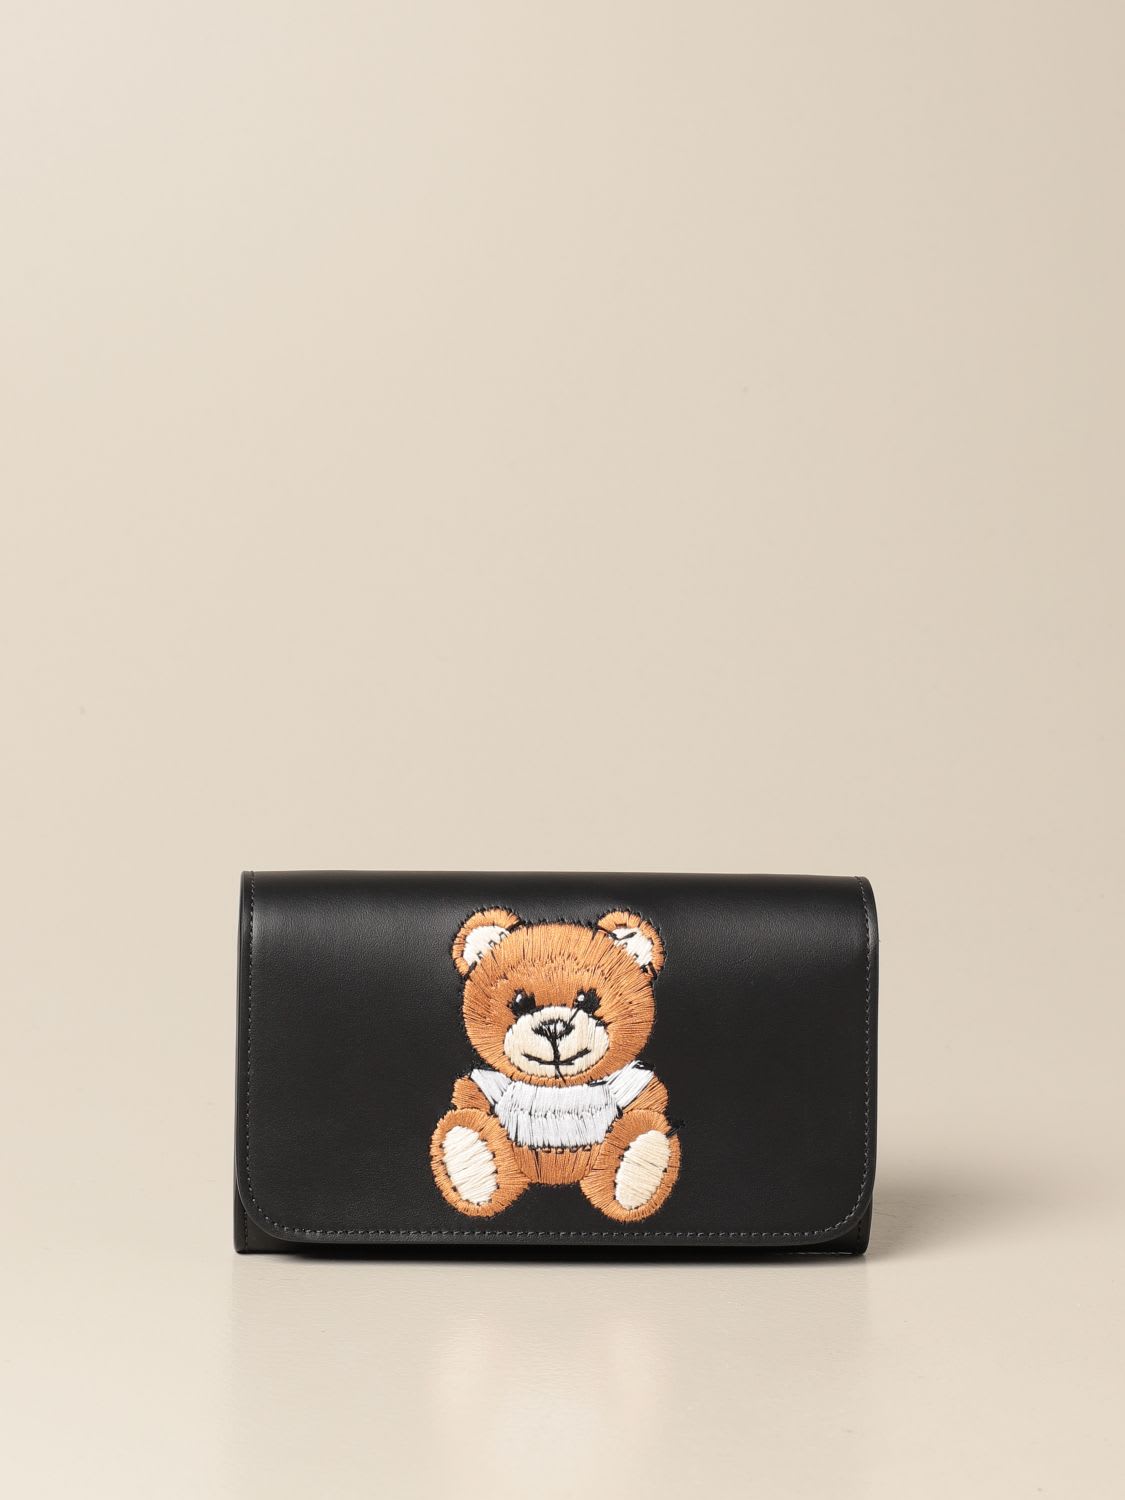 Moschino Couture Mini Bag Moschino Couture Leather Bag With Teddy